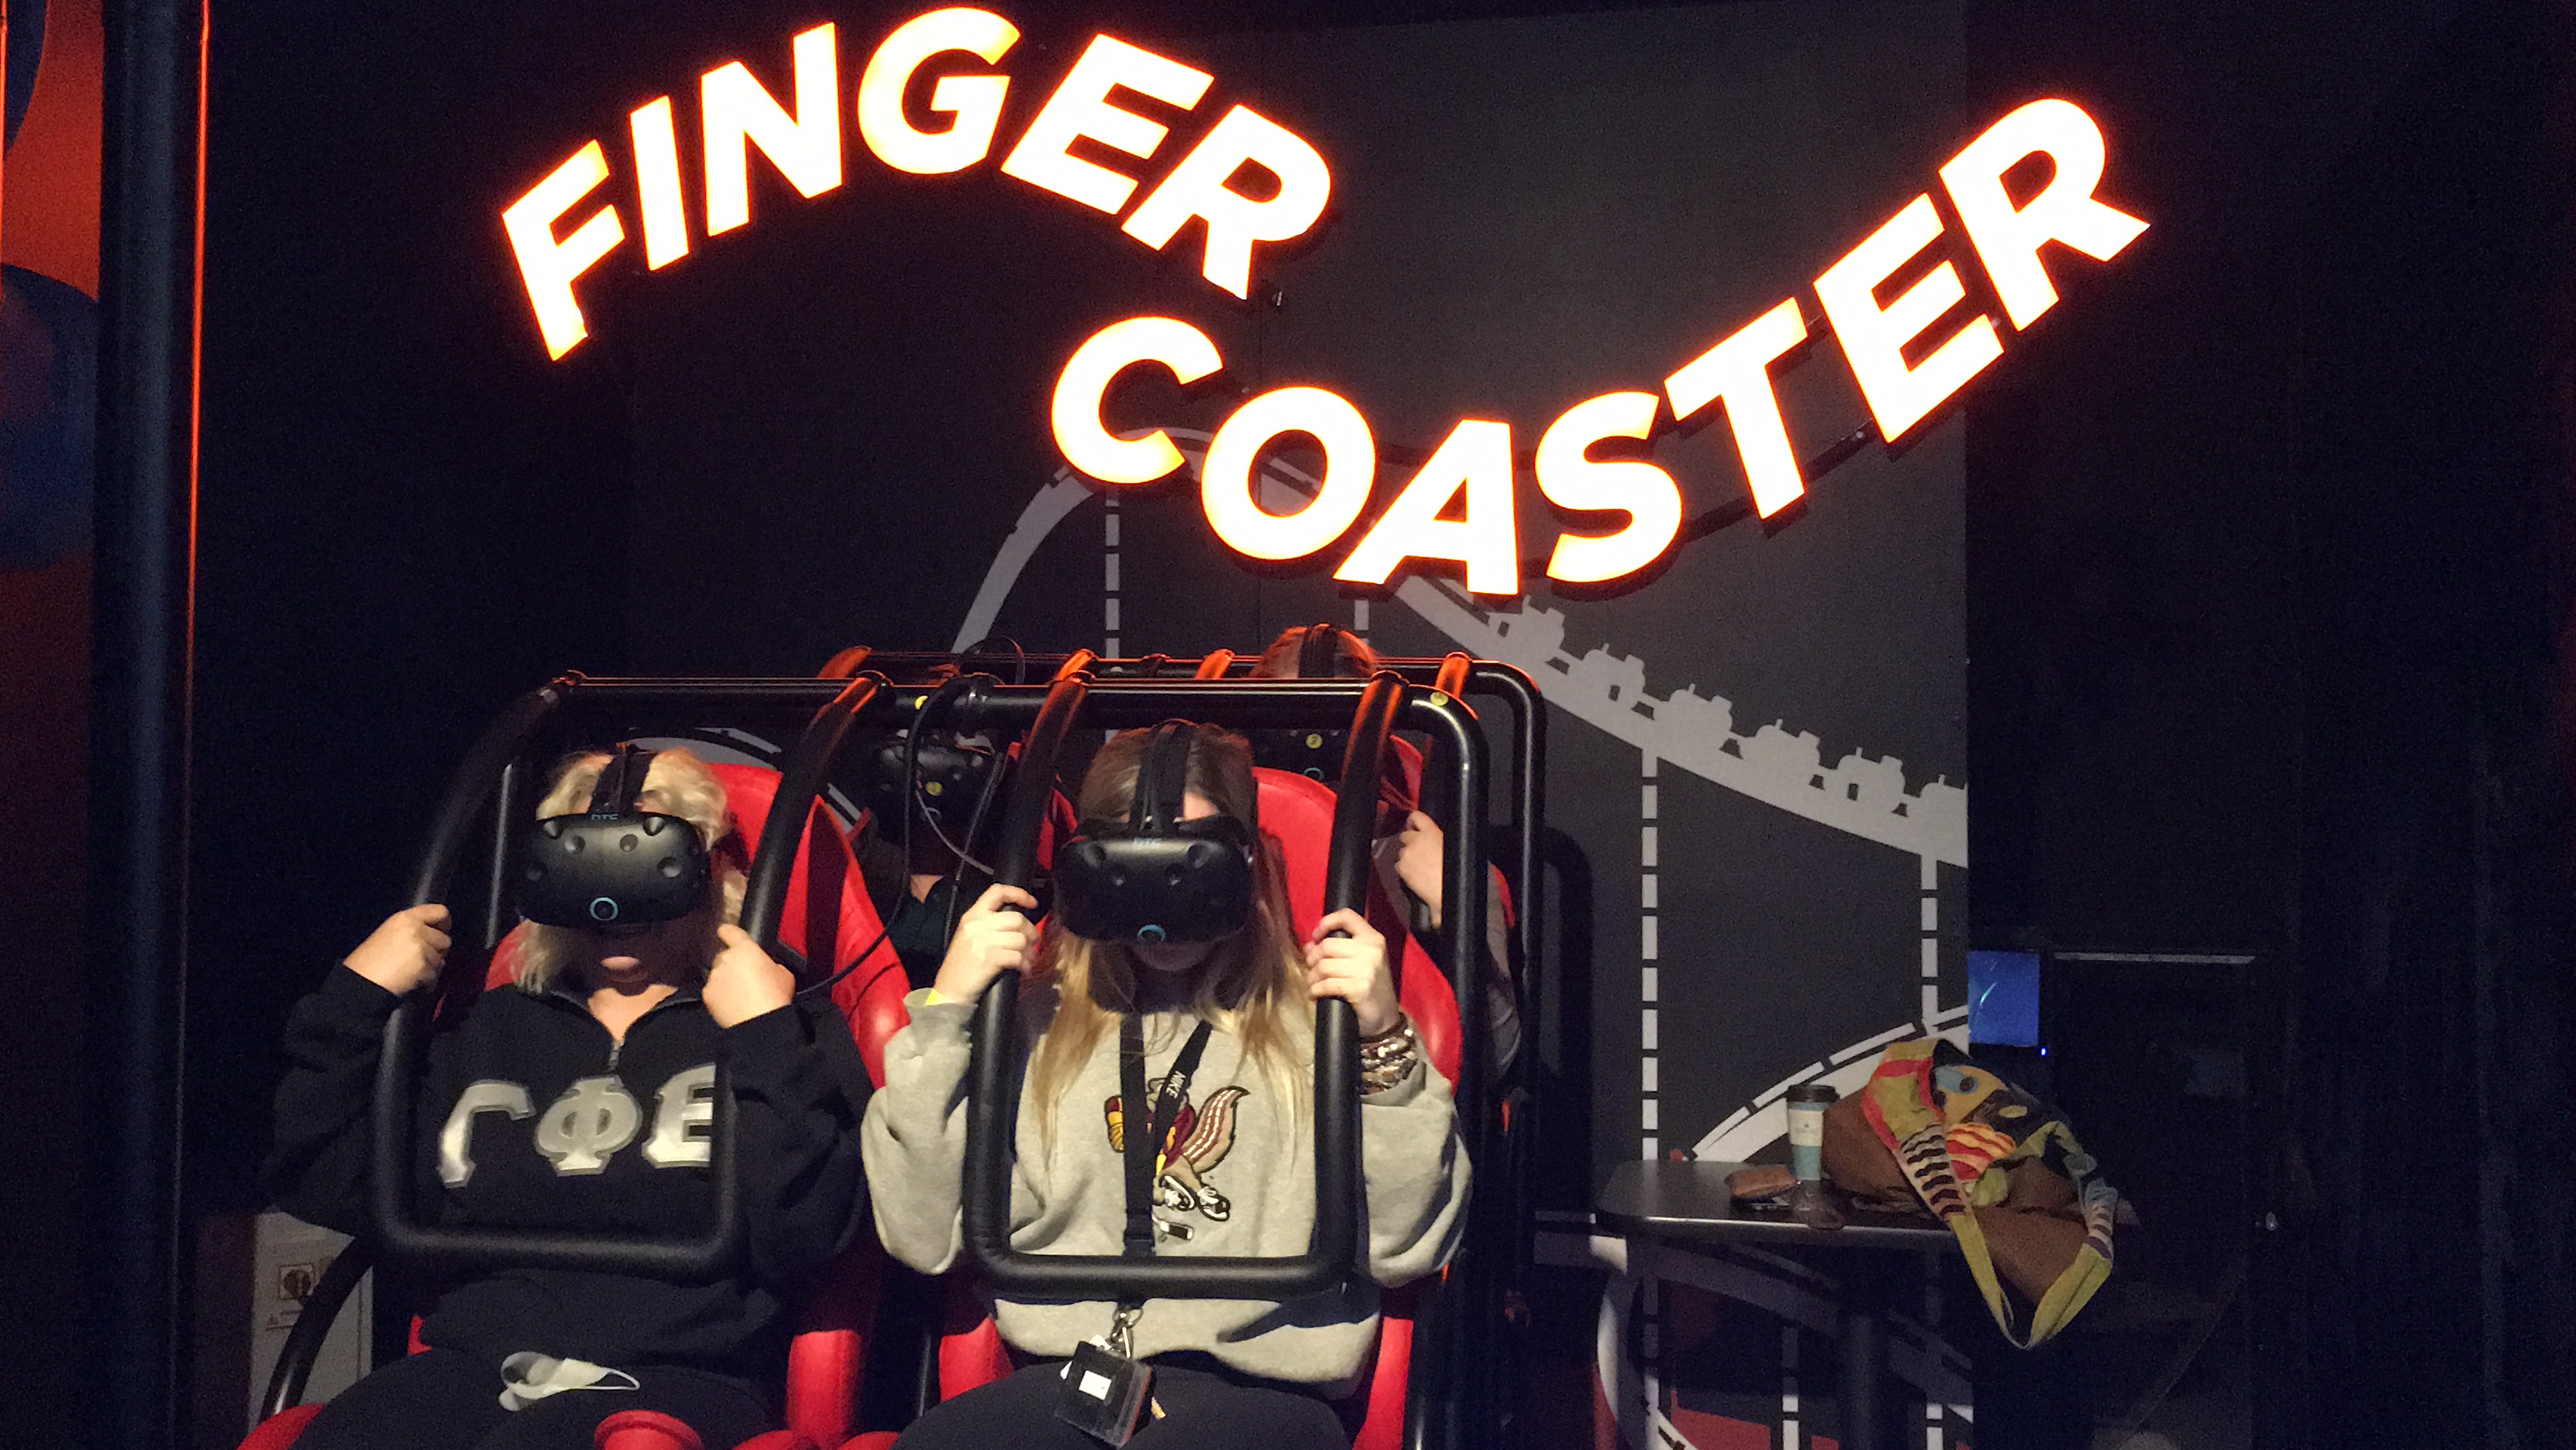 players riding finger coaster